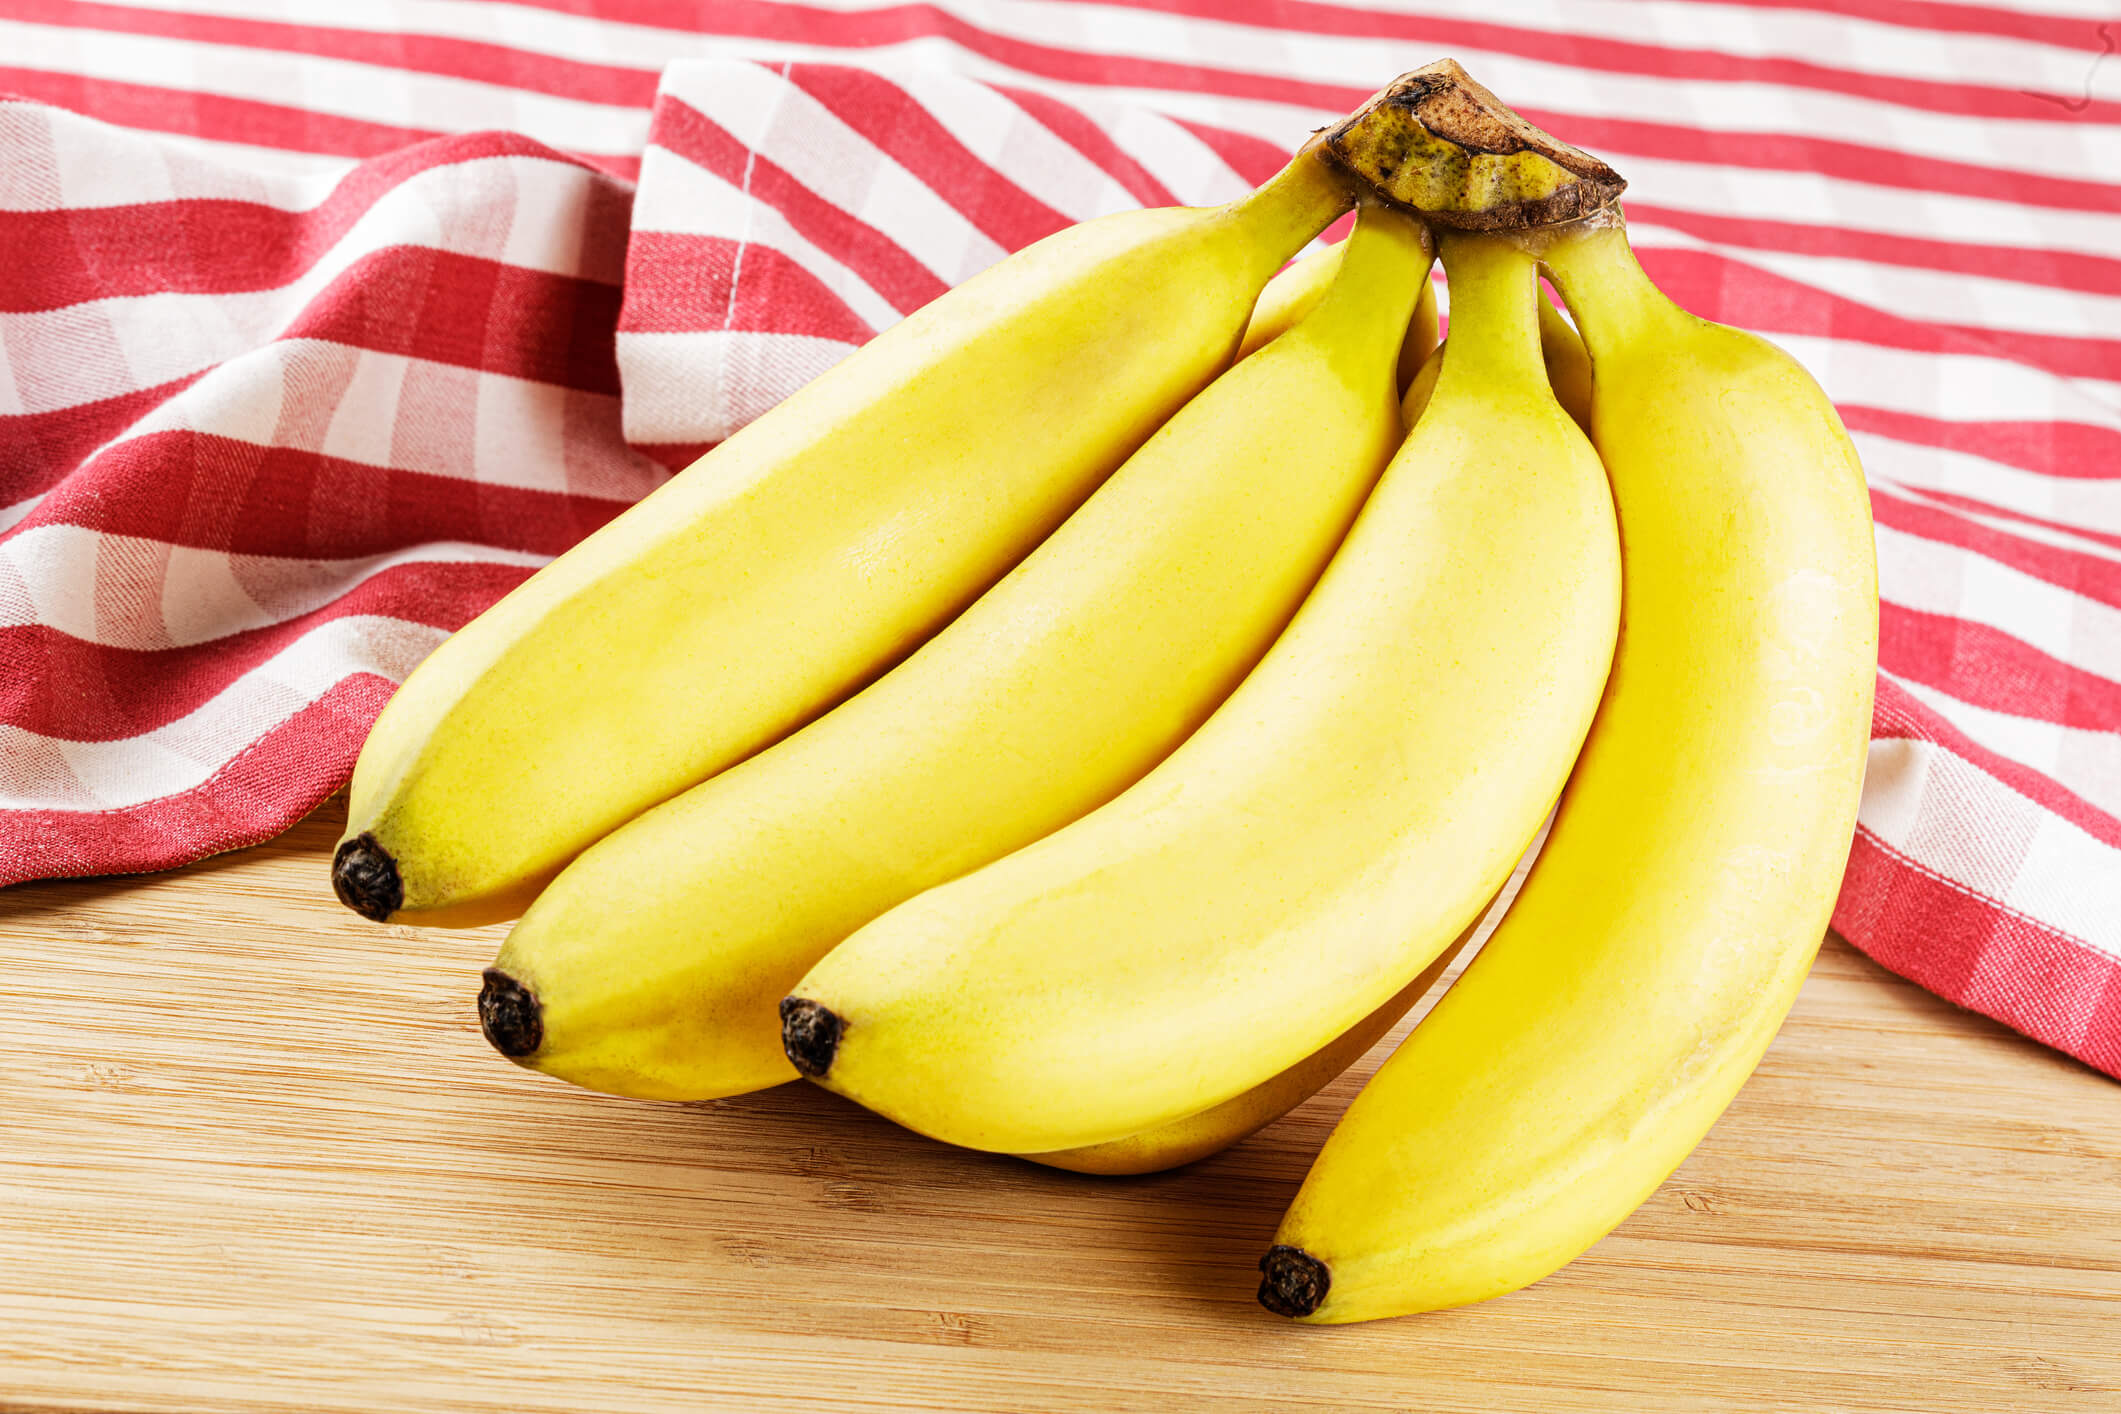 A bunch of bananas on a wooden table set against a white and red cloth